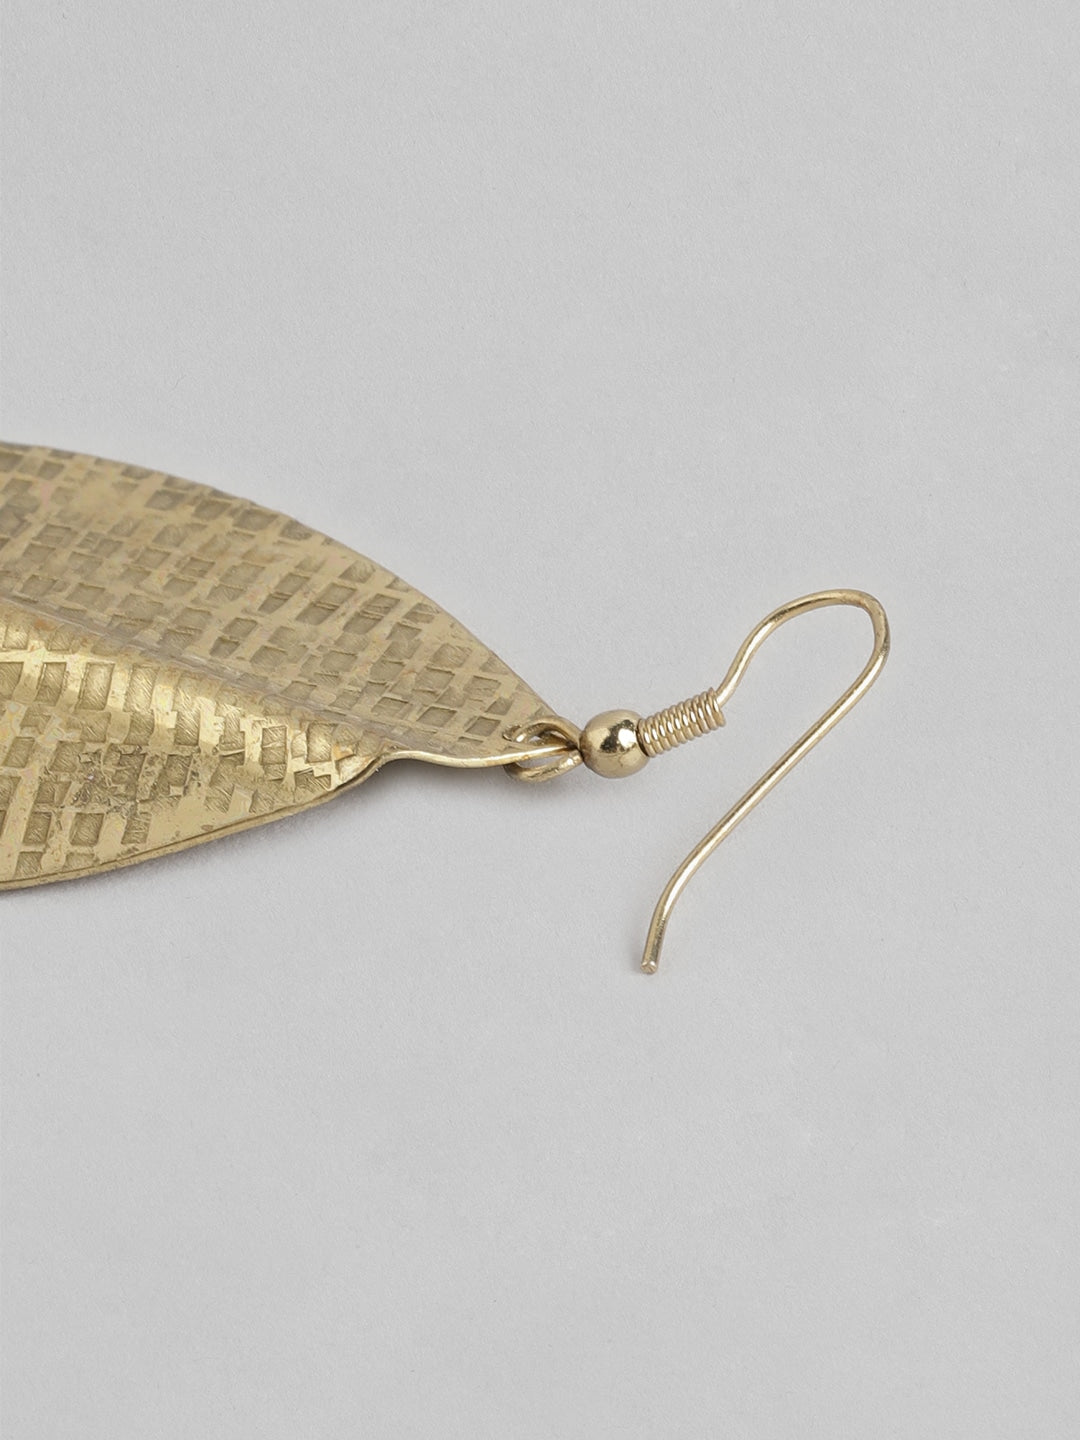 Gold-Plated Leaf Shaped Drop Earrings